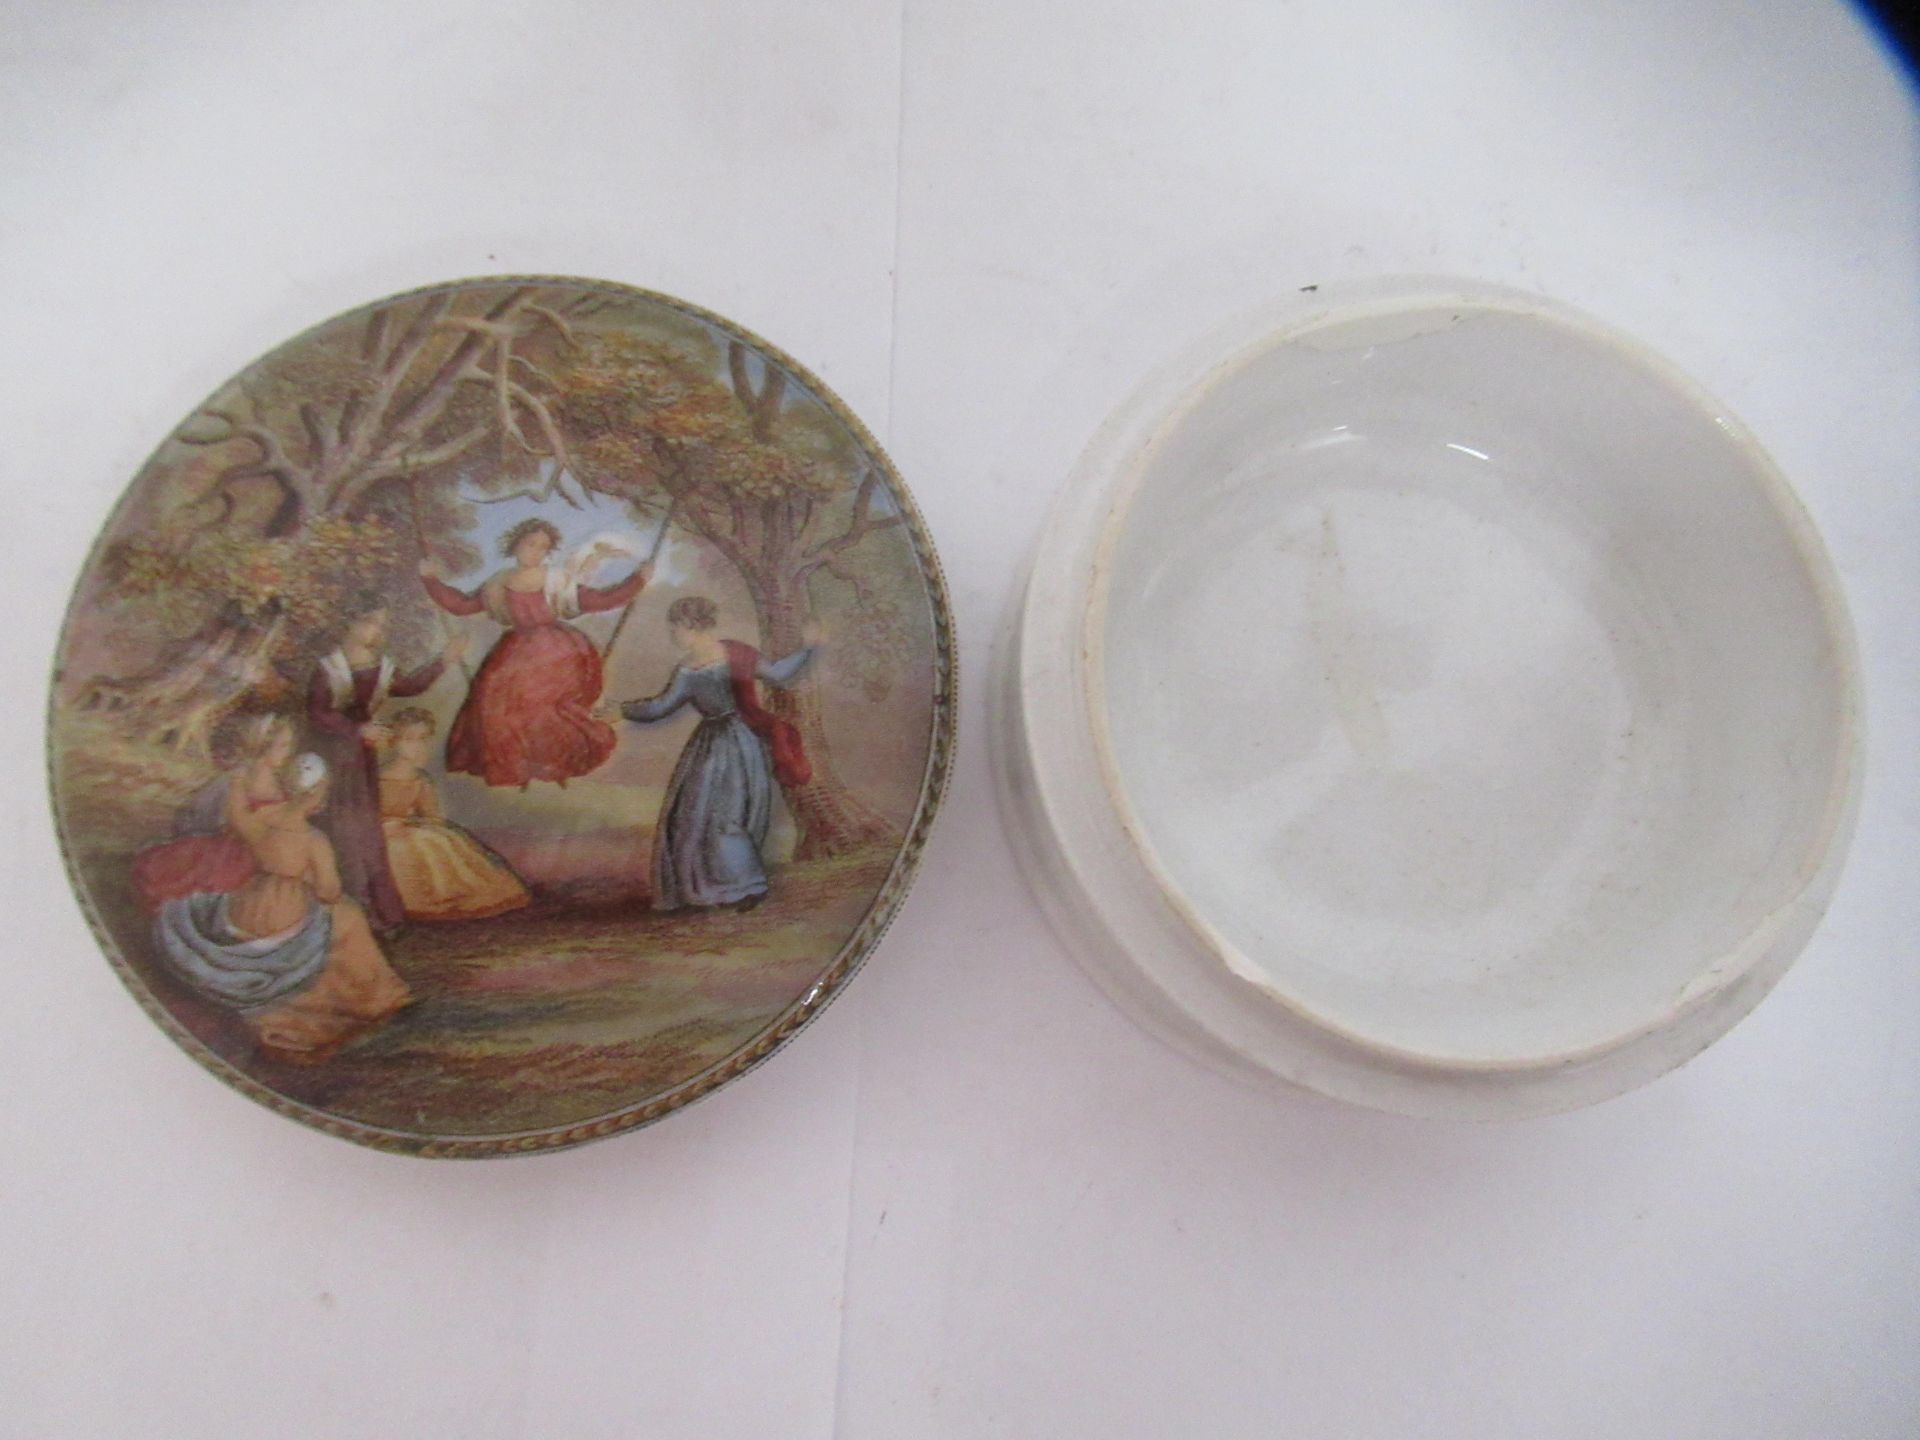 6x Prattware ceramic lids including 'On Guard', 'The Rivals', 'The Cavalier', and 'Peace' - Image 25 of 37